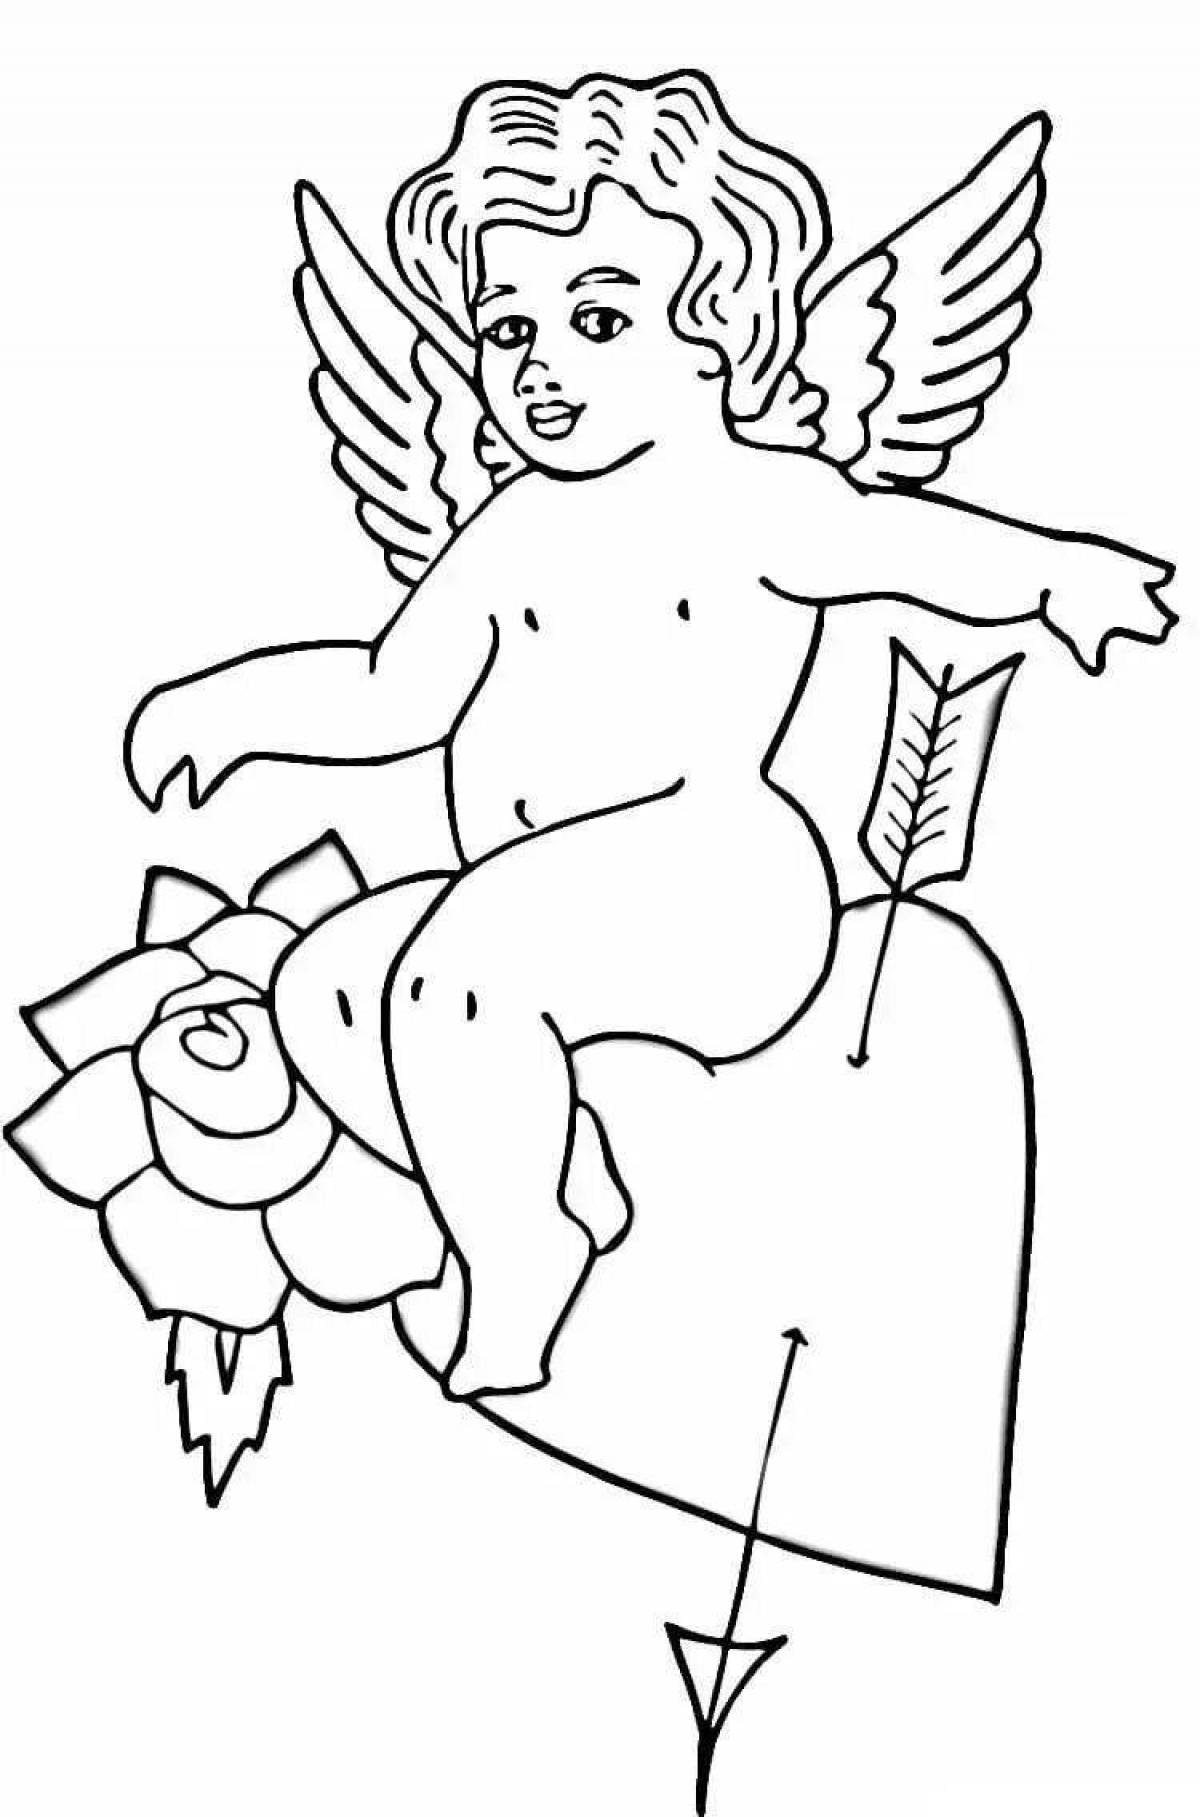 Colorful cupid with heart coloring book